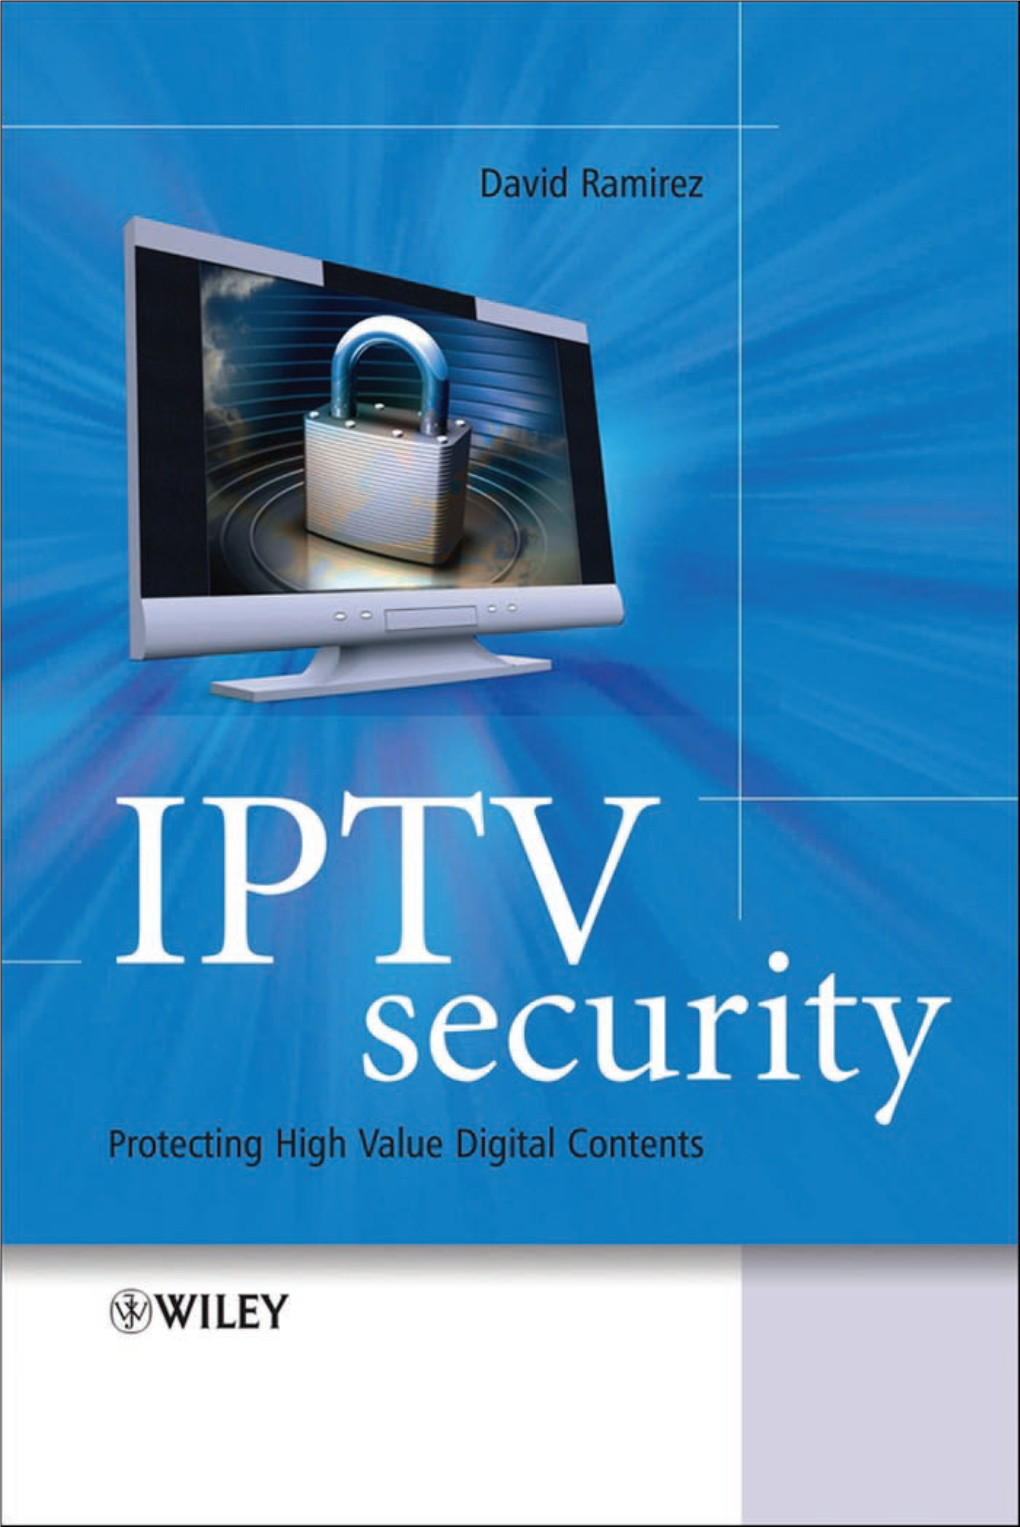 IPTV Security Protecting High-Value Digital Contents